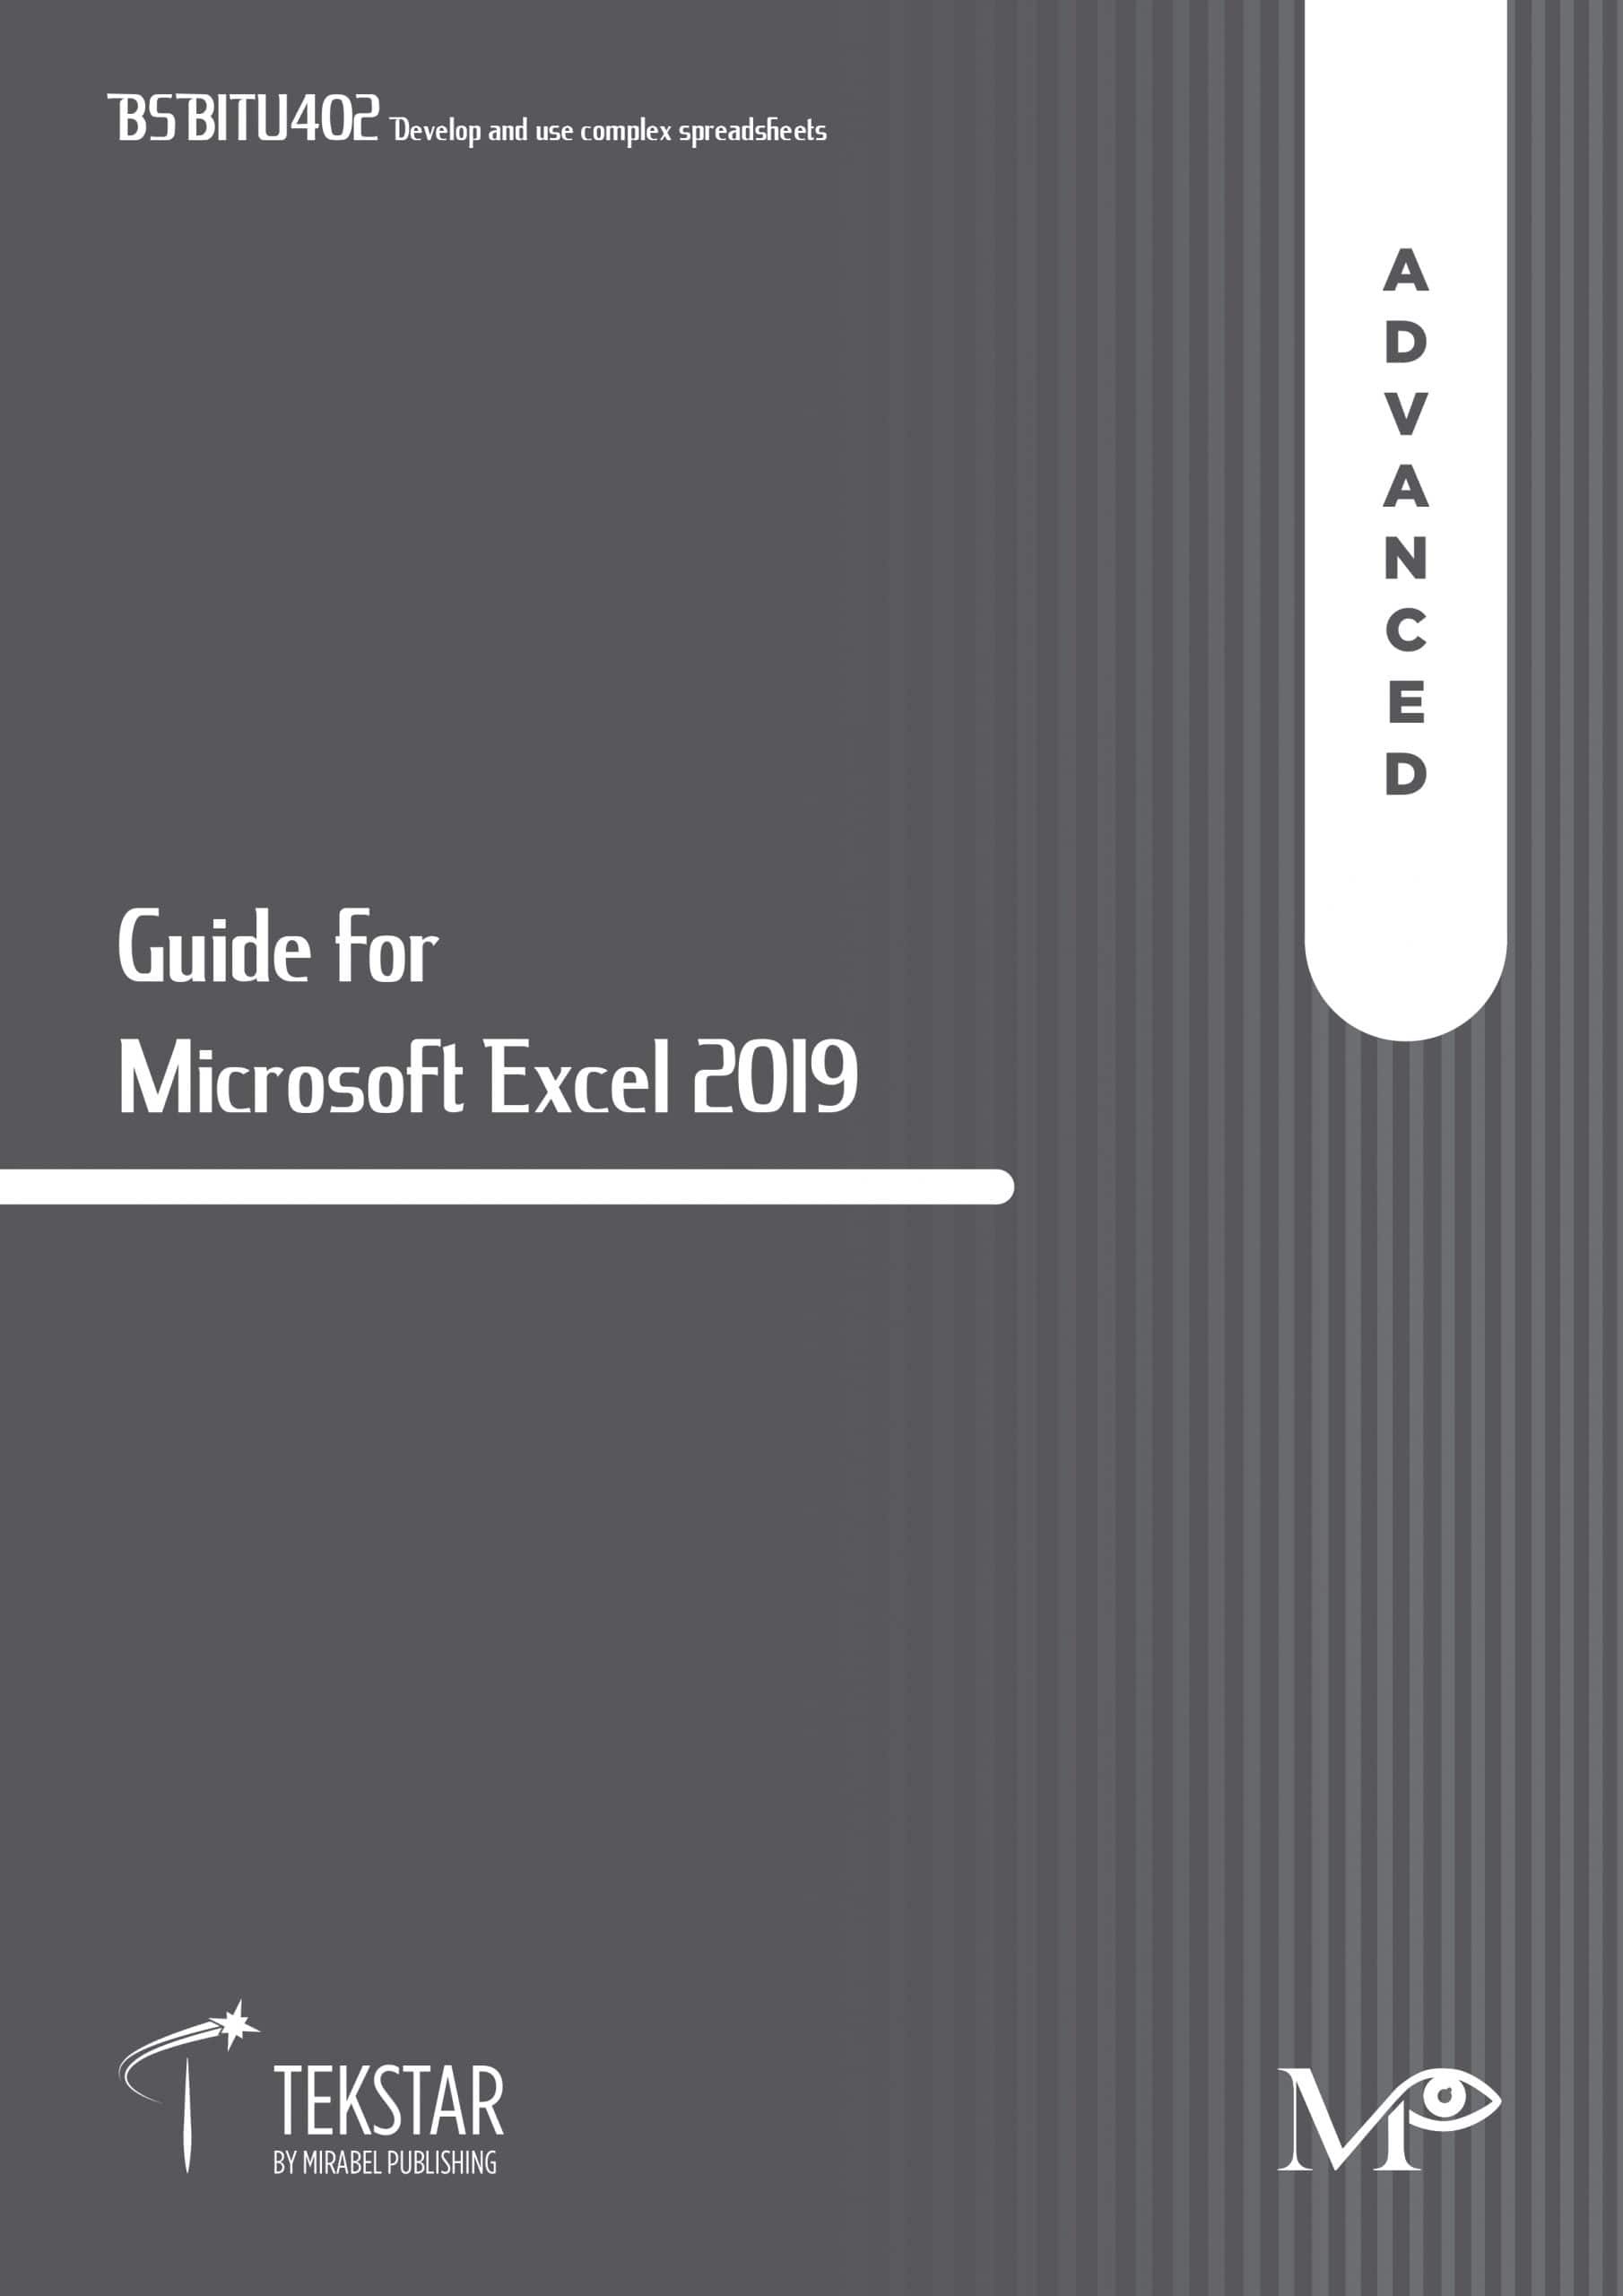 Guide for Microsoft Excel 2019 - Advanced